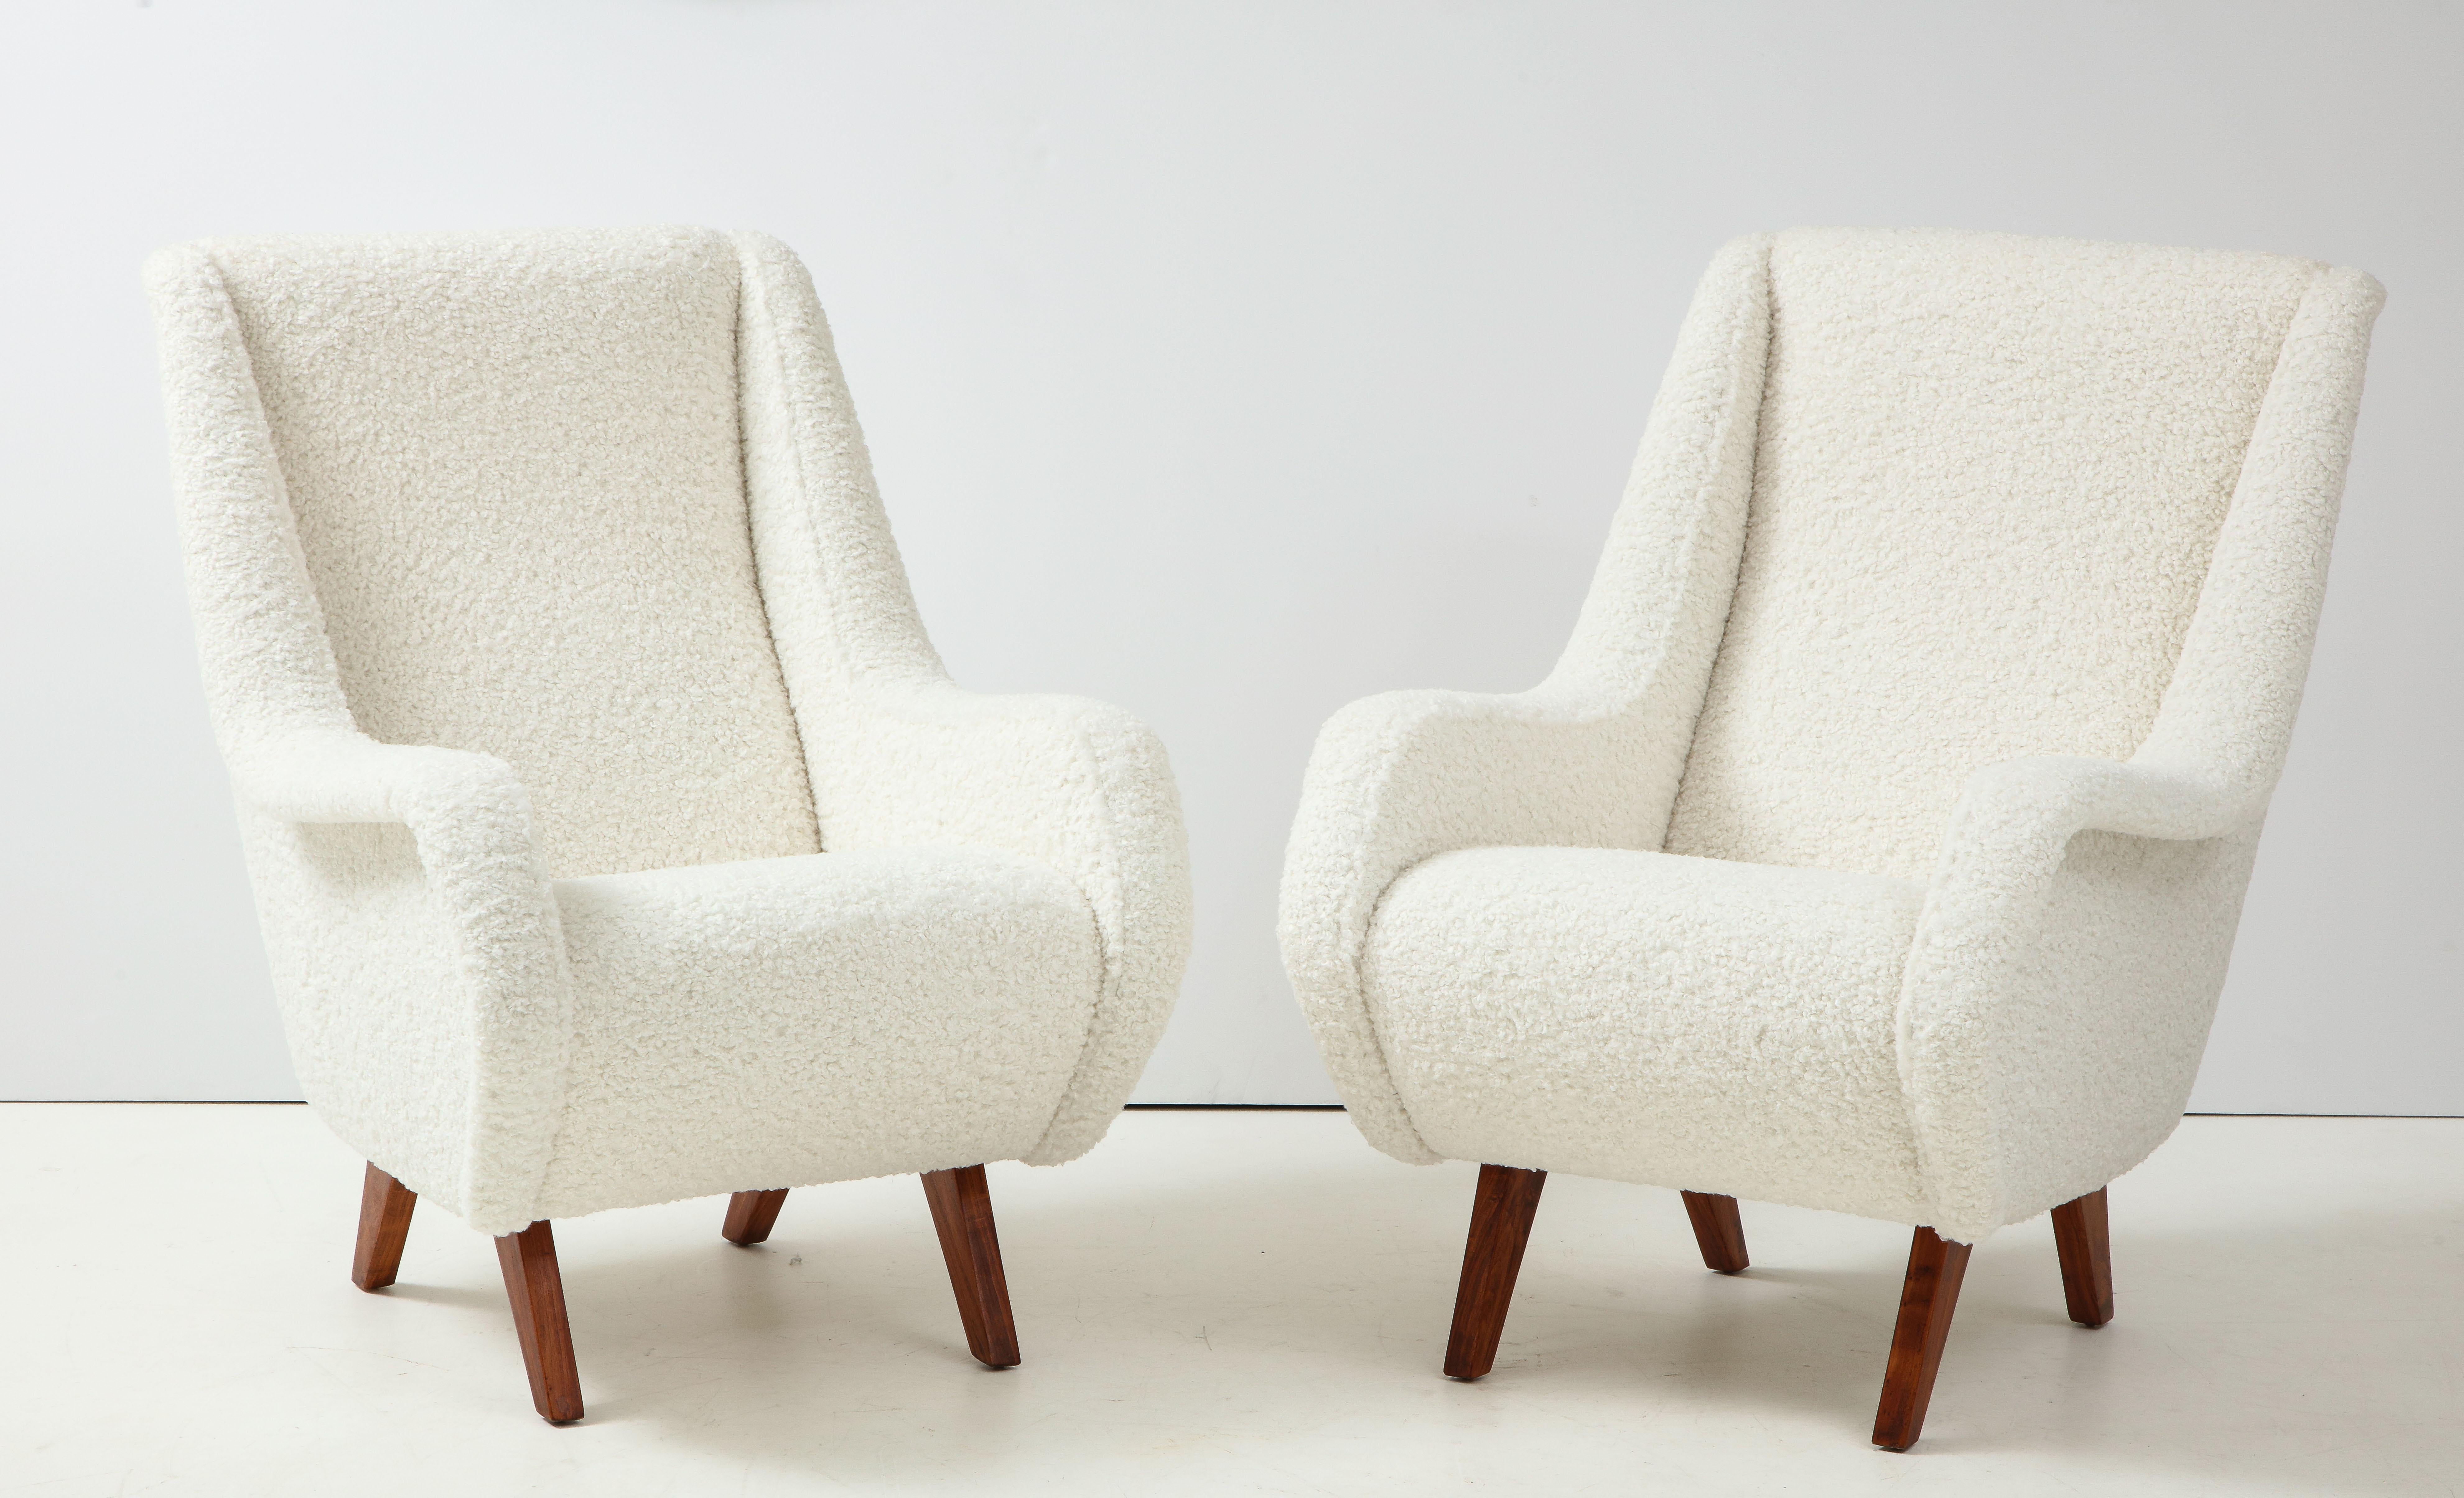 A pair of Italian vintage 1950's lounge chairs with elegantly sloped arm rests extending from the high back, supported on pine legs; the whole newly restructured and re-upholstered in white faux shearling. Extremely comfortable and timeless organic